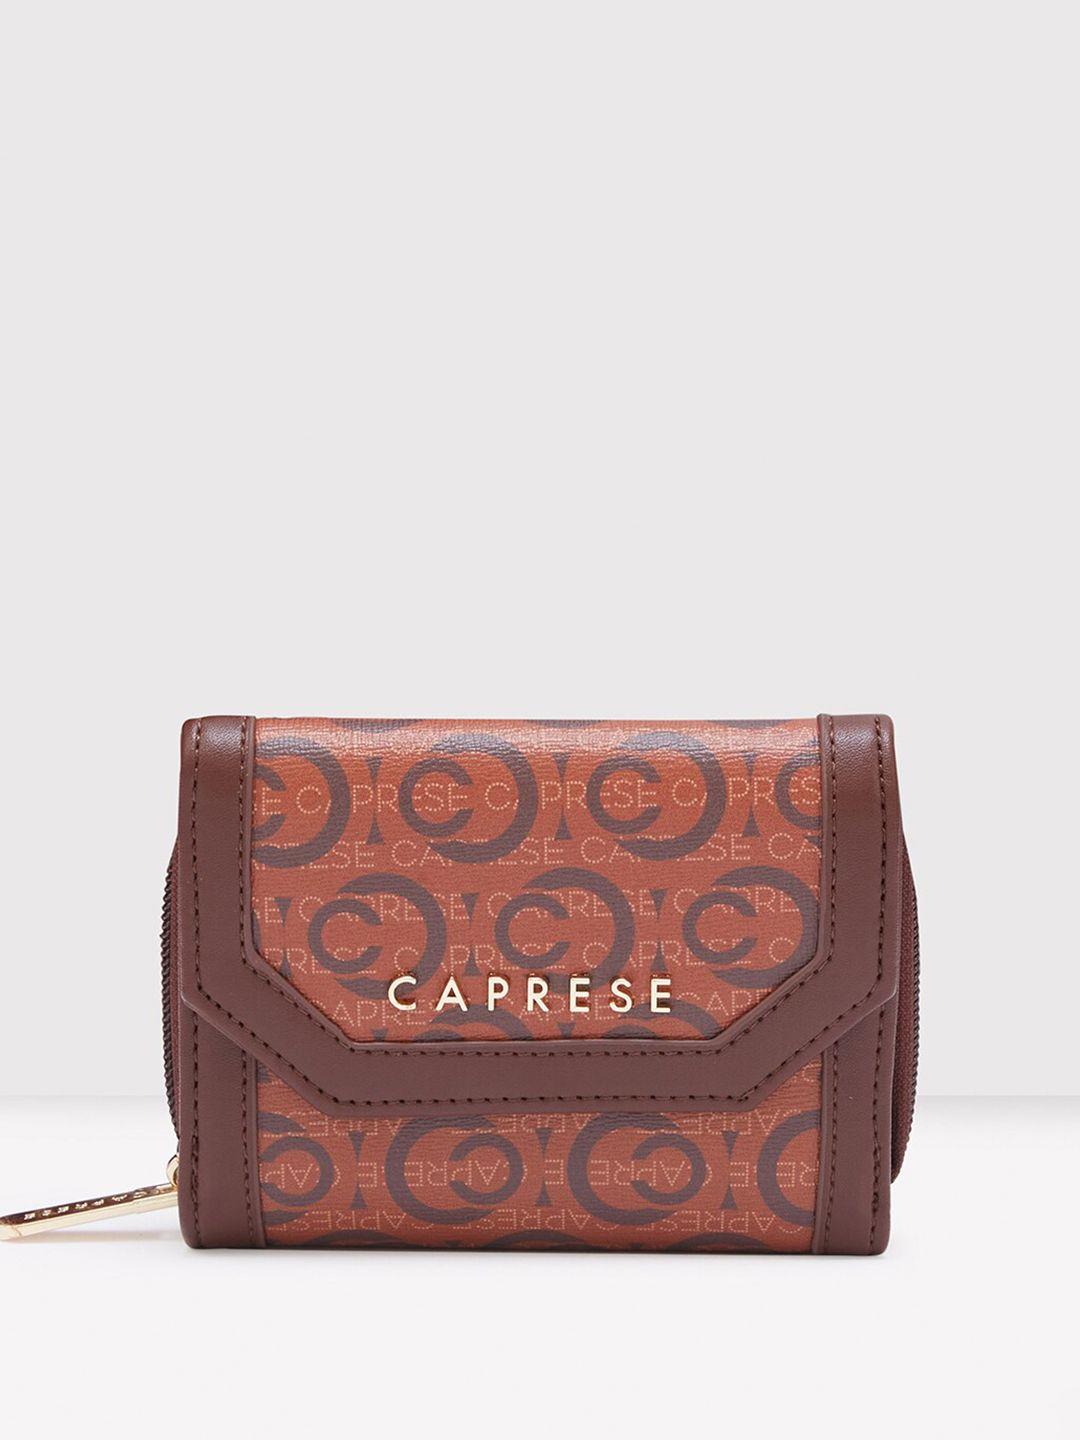 caprese printed leather two fold wallet